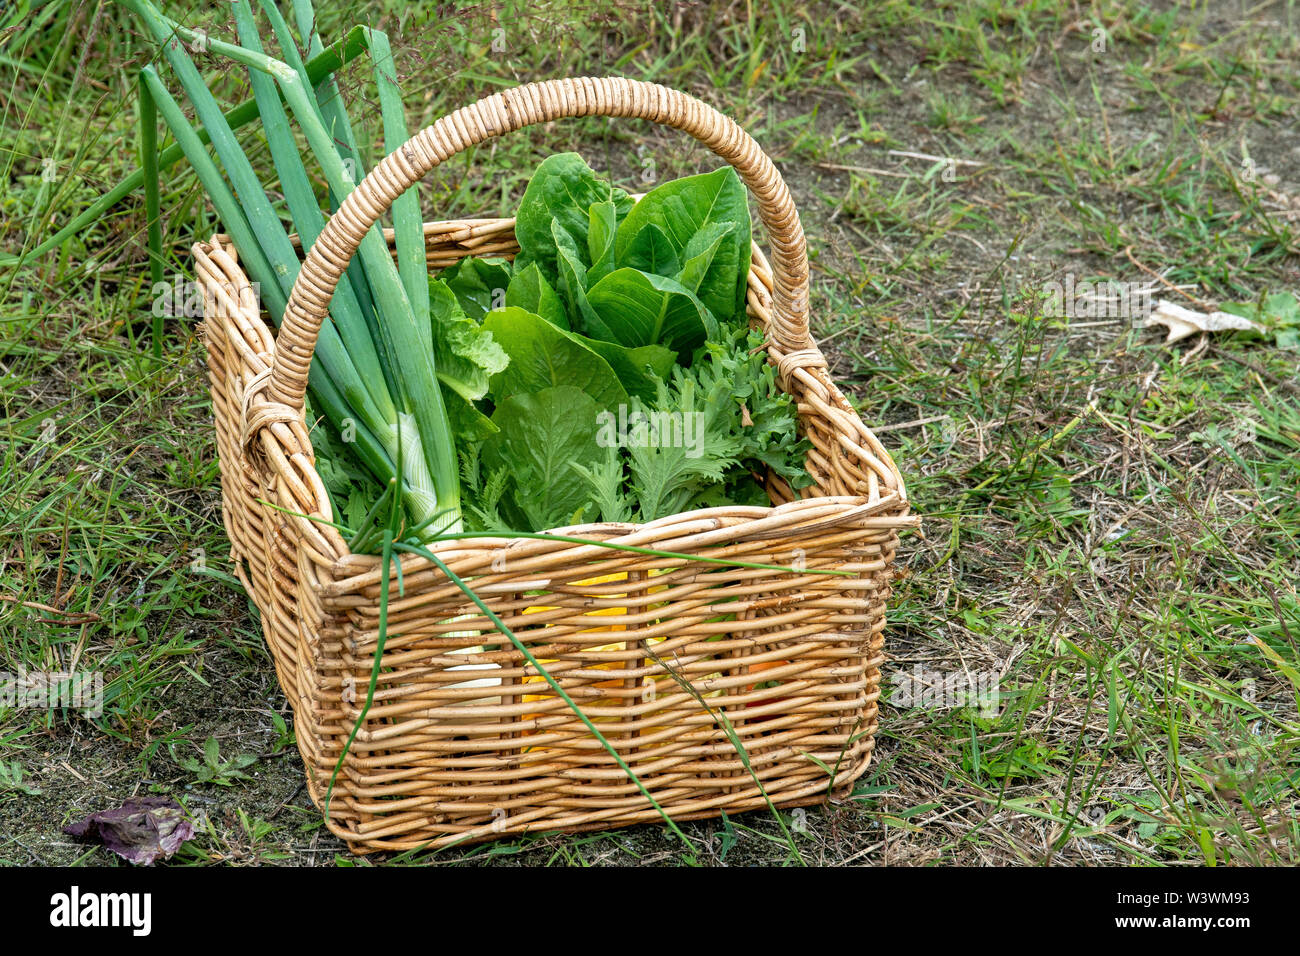 Fresh vegtables from a backyard garden are harvested and in basket to be enjoyed. Stock Photo